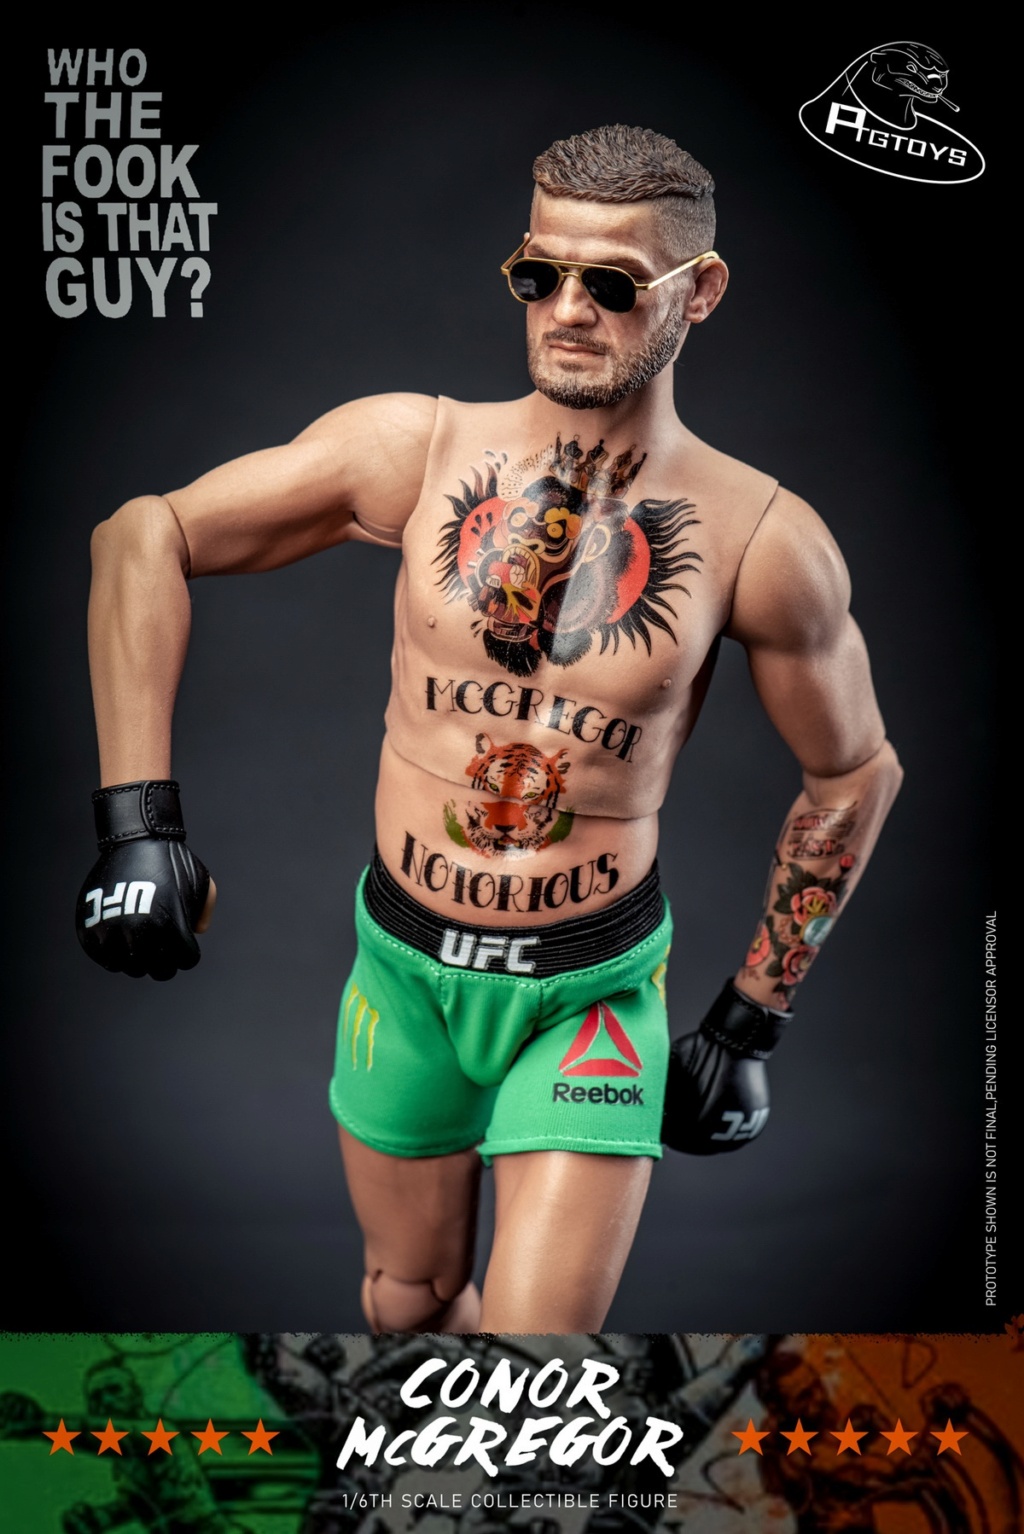 PTGToys - NEW PRODUCT: PTGToys: 1/6 Conor MCGREGOR Action Figure  16552310